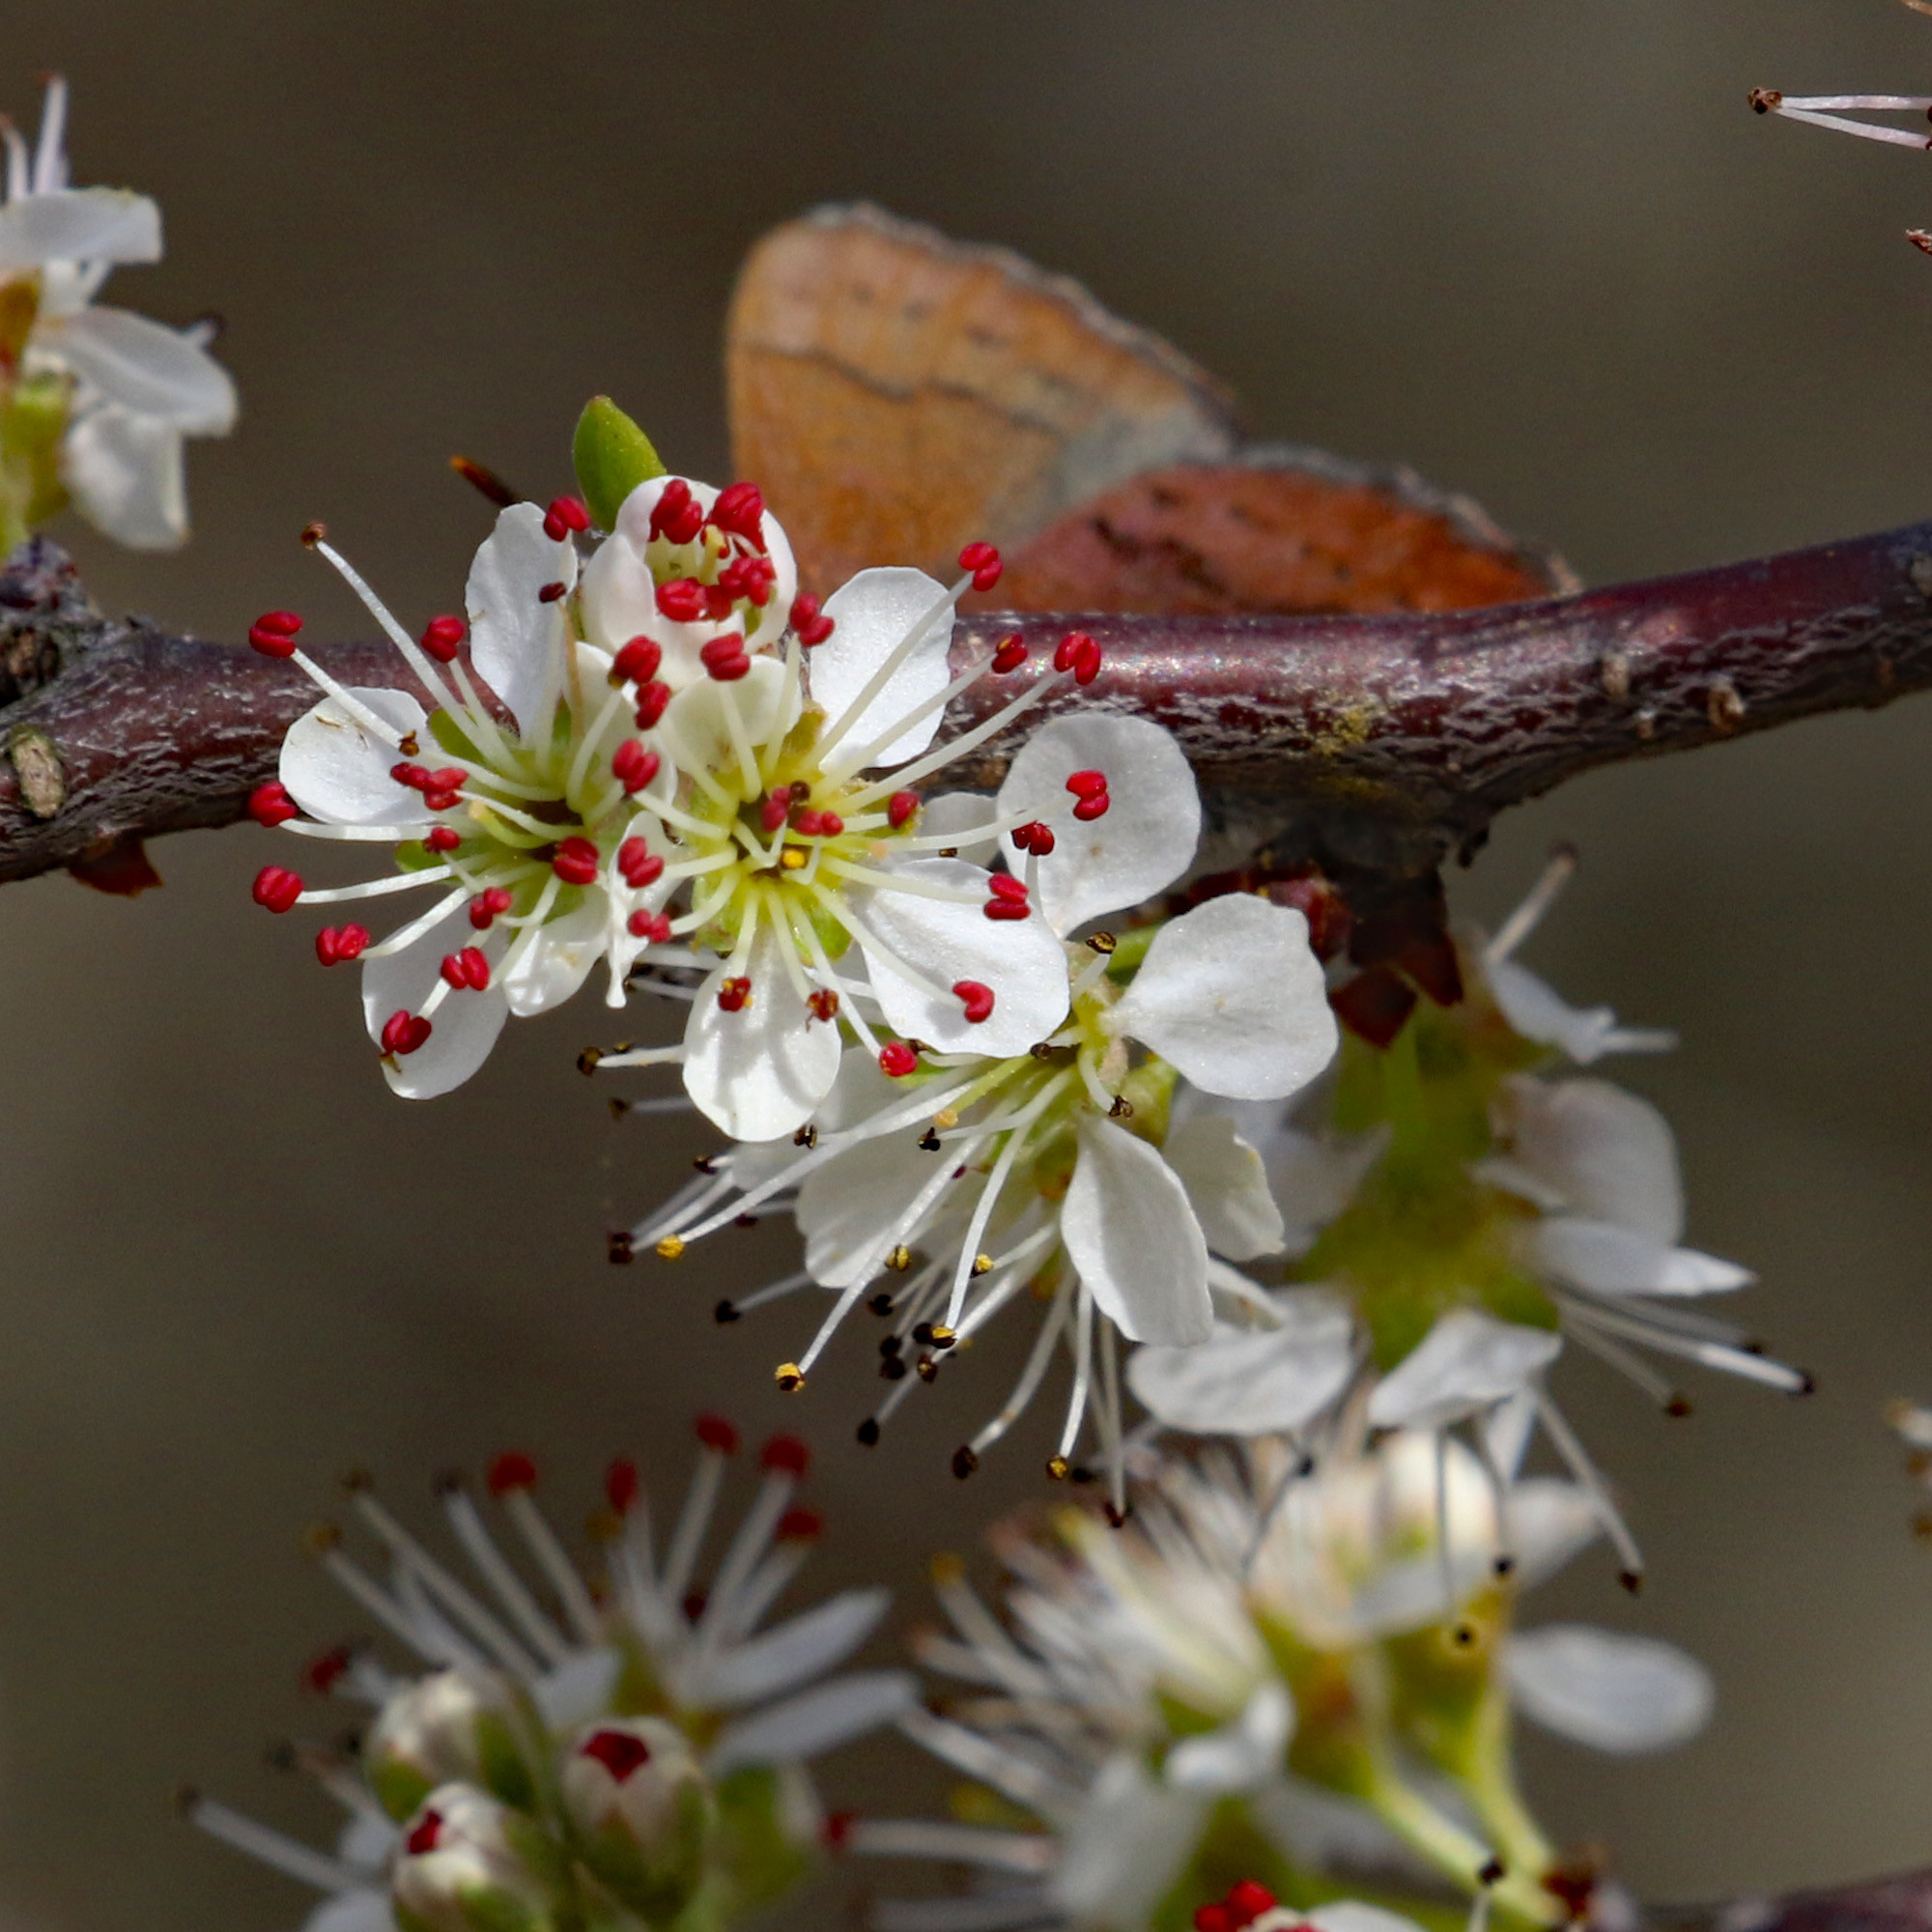 The Scientific Name is Prunus angustifolia. You will likely hear them called Chickasaw Plum. This picture shows the Chickasaw Plum blossoms are small and ephemeral.  The 5-petaled flowers have bright pink anthers when blossom are fresh, usually only the first day.. of Prunus angustifolia